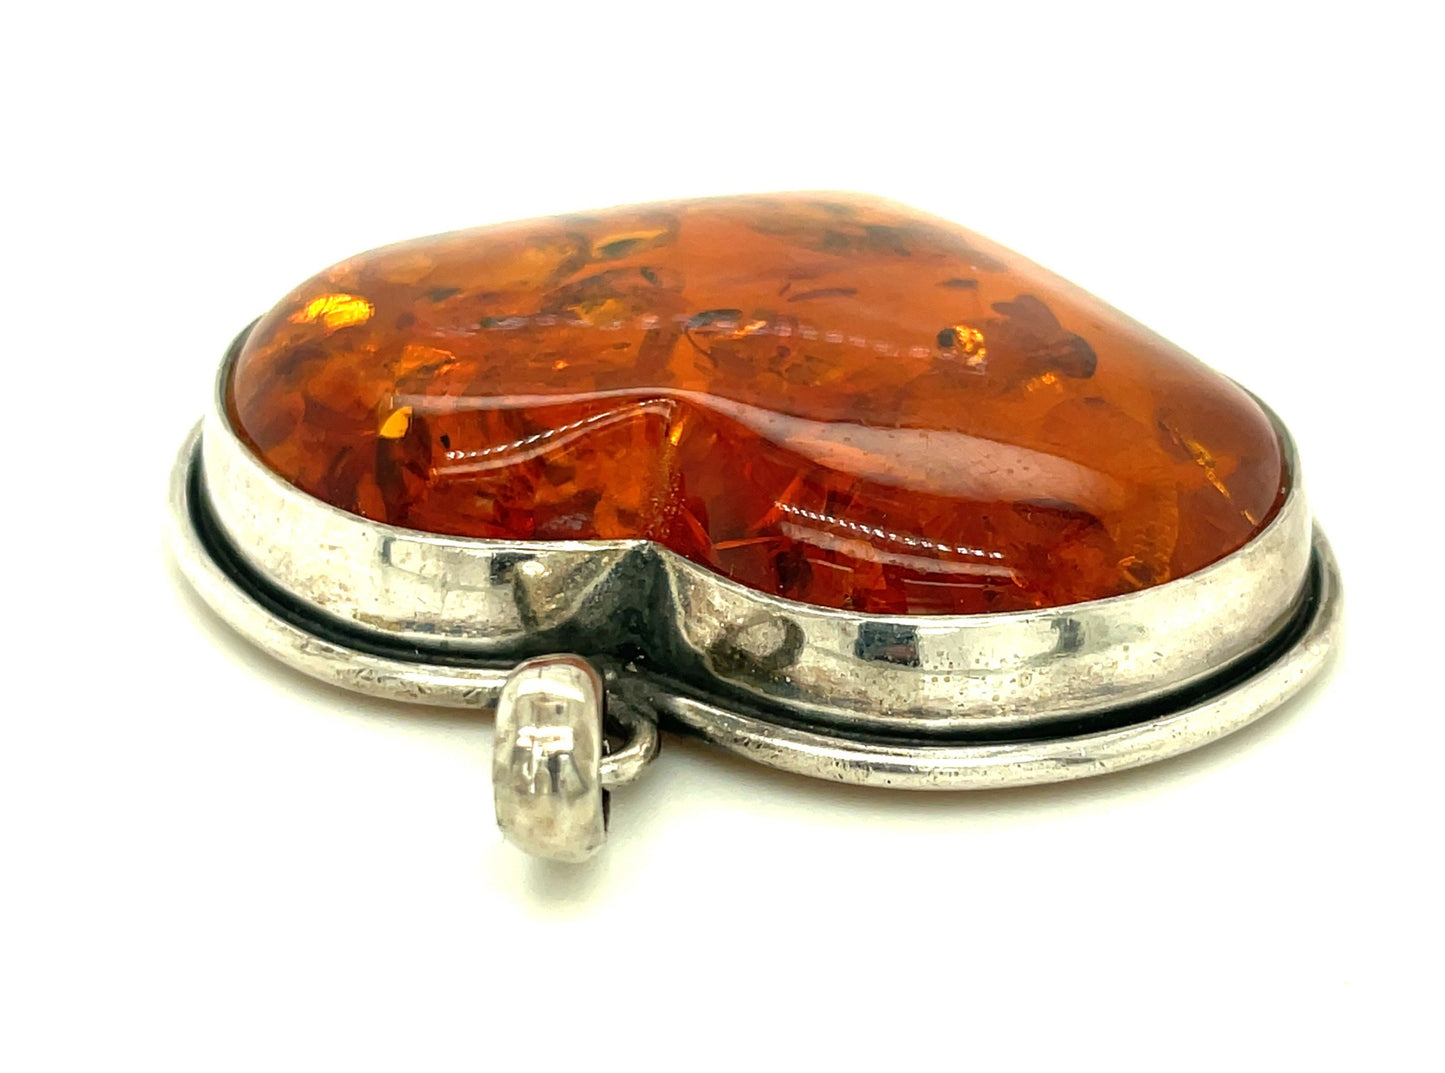 Vintage Sterling Silver and Amber Heart Pendant